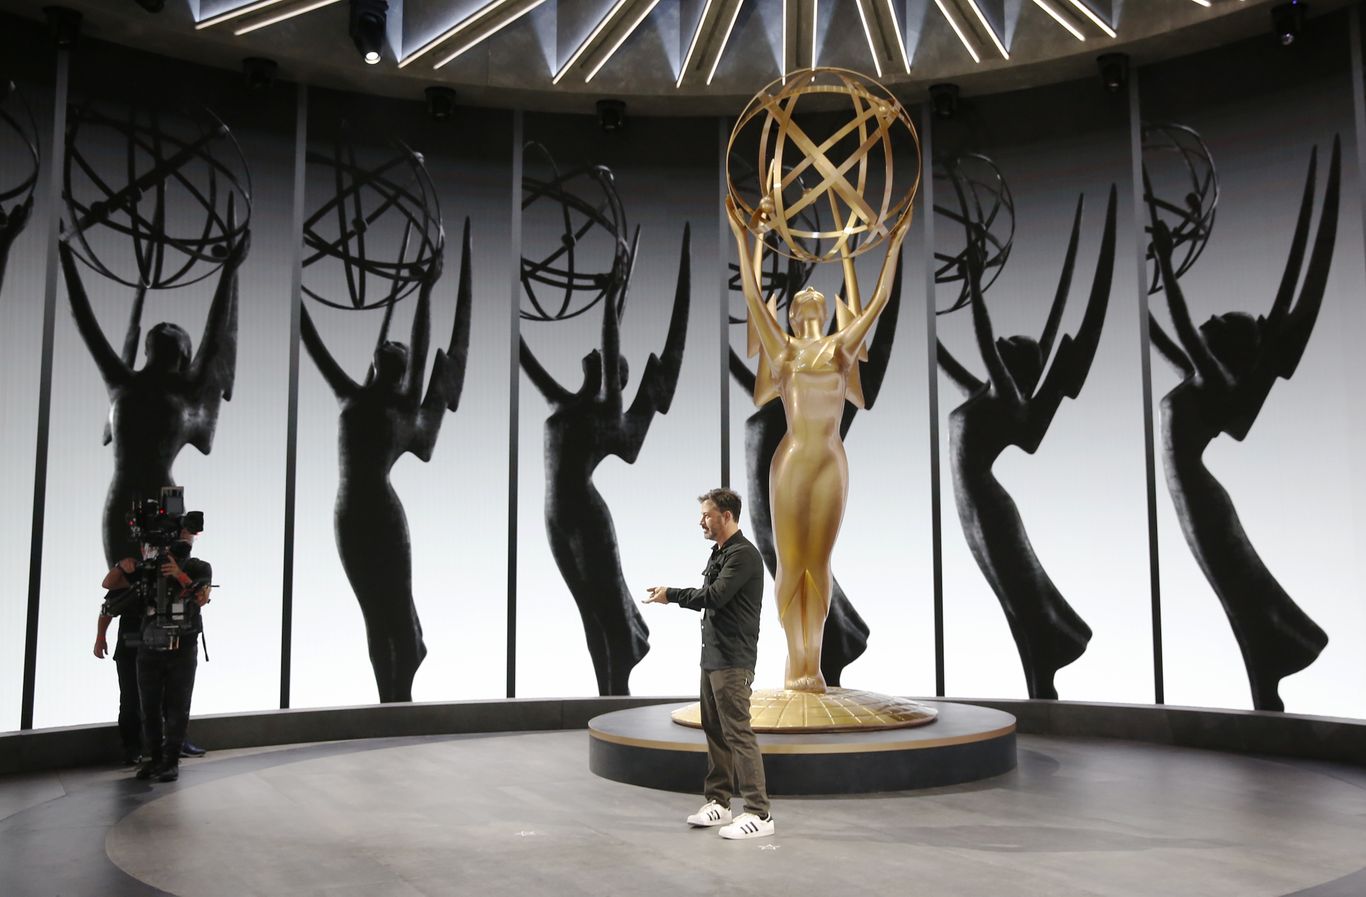 Virtual Emmys address chaotic year for American TV and society thumbnail